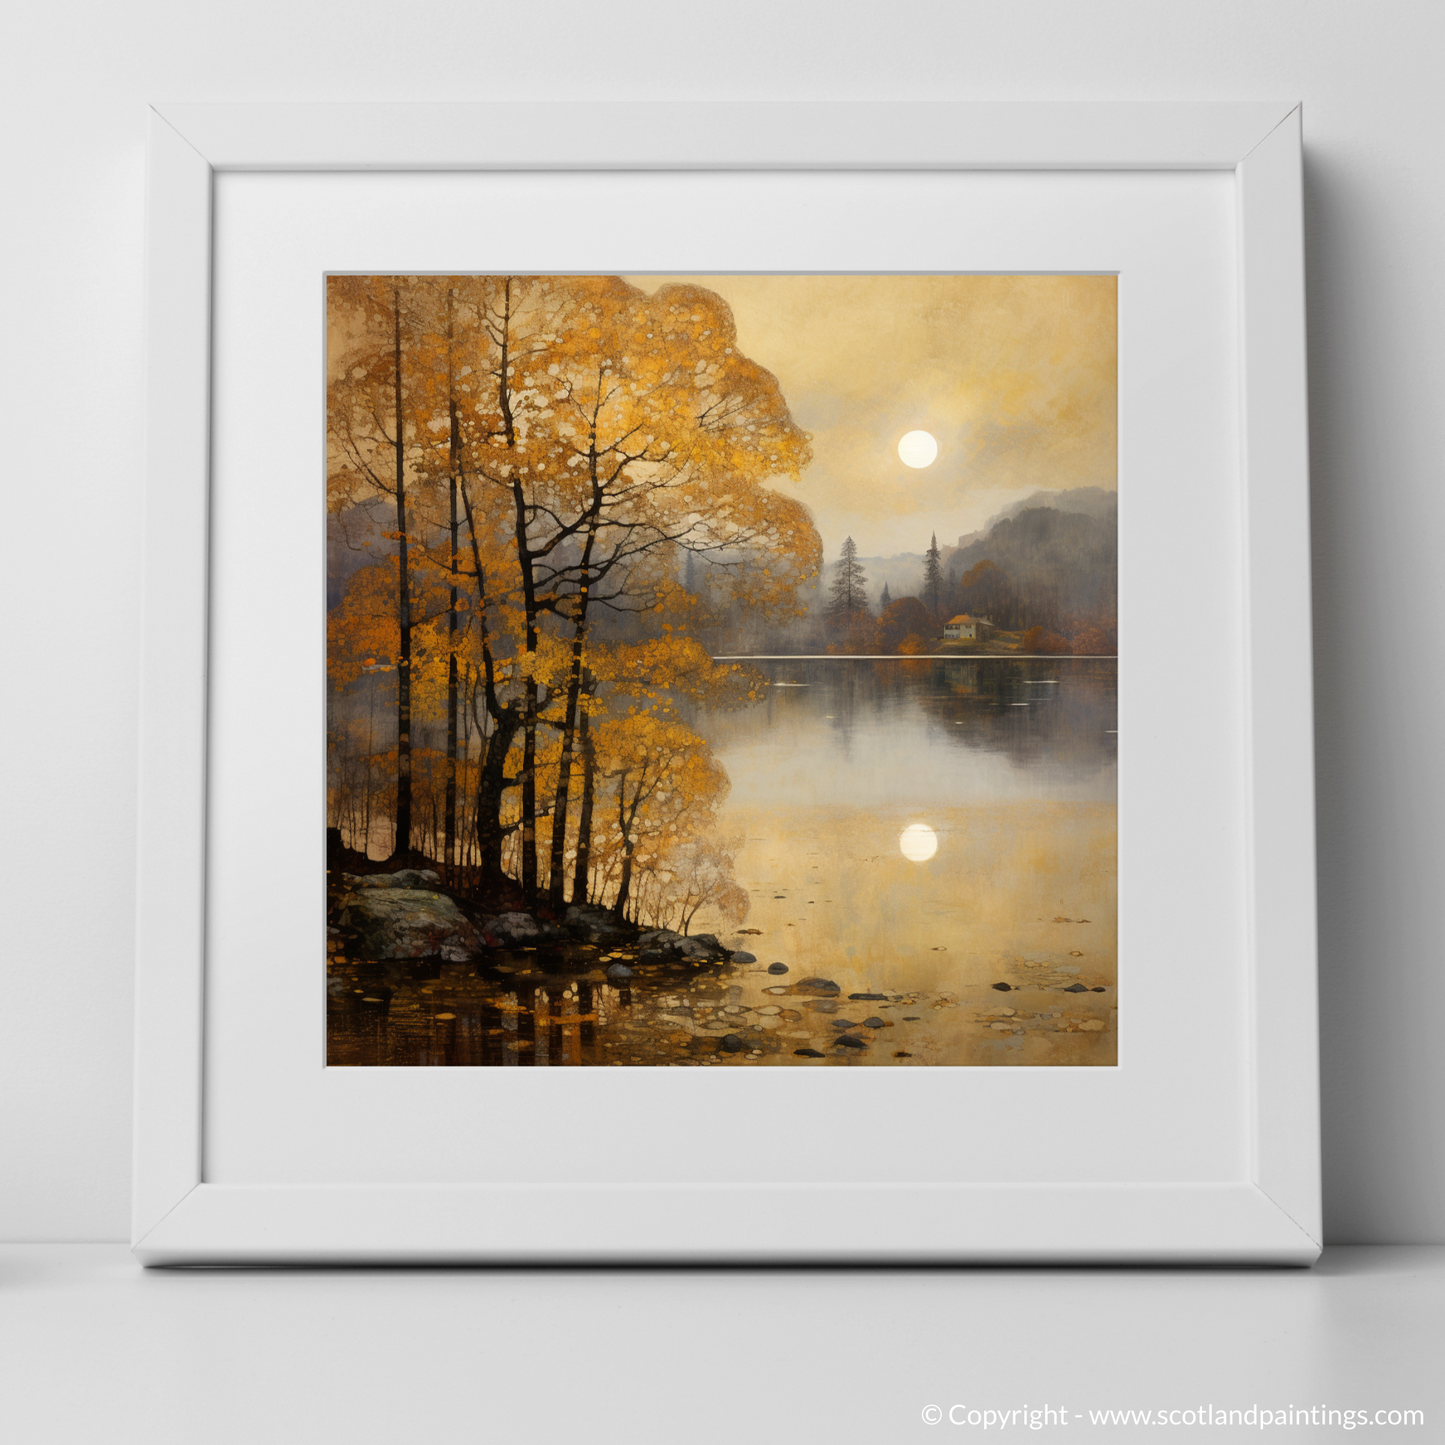 Art Print of Misty morning on Loch Lomond with a white frame